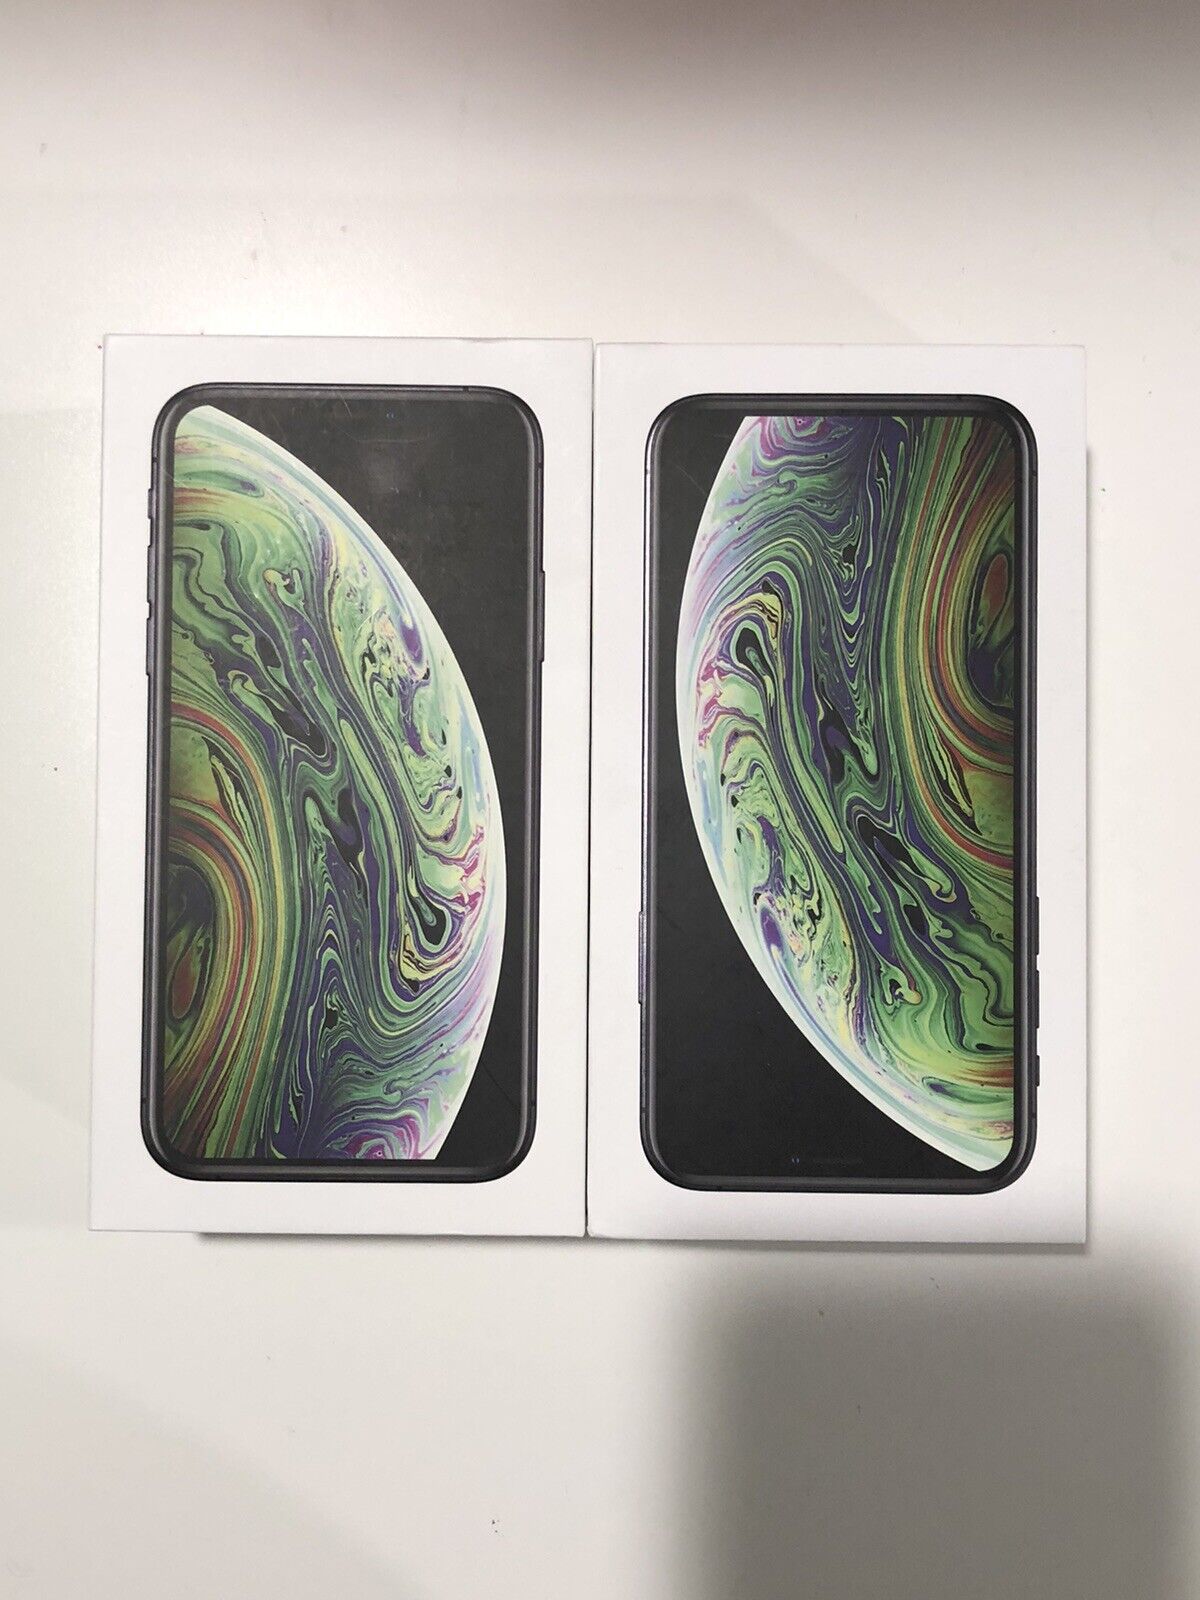 Lot of 2 iPhone Xs Boxes ONLY, Space Gray Color Apple